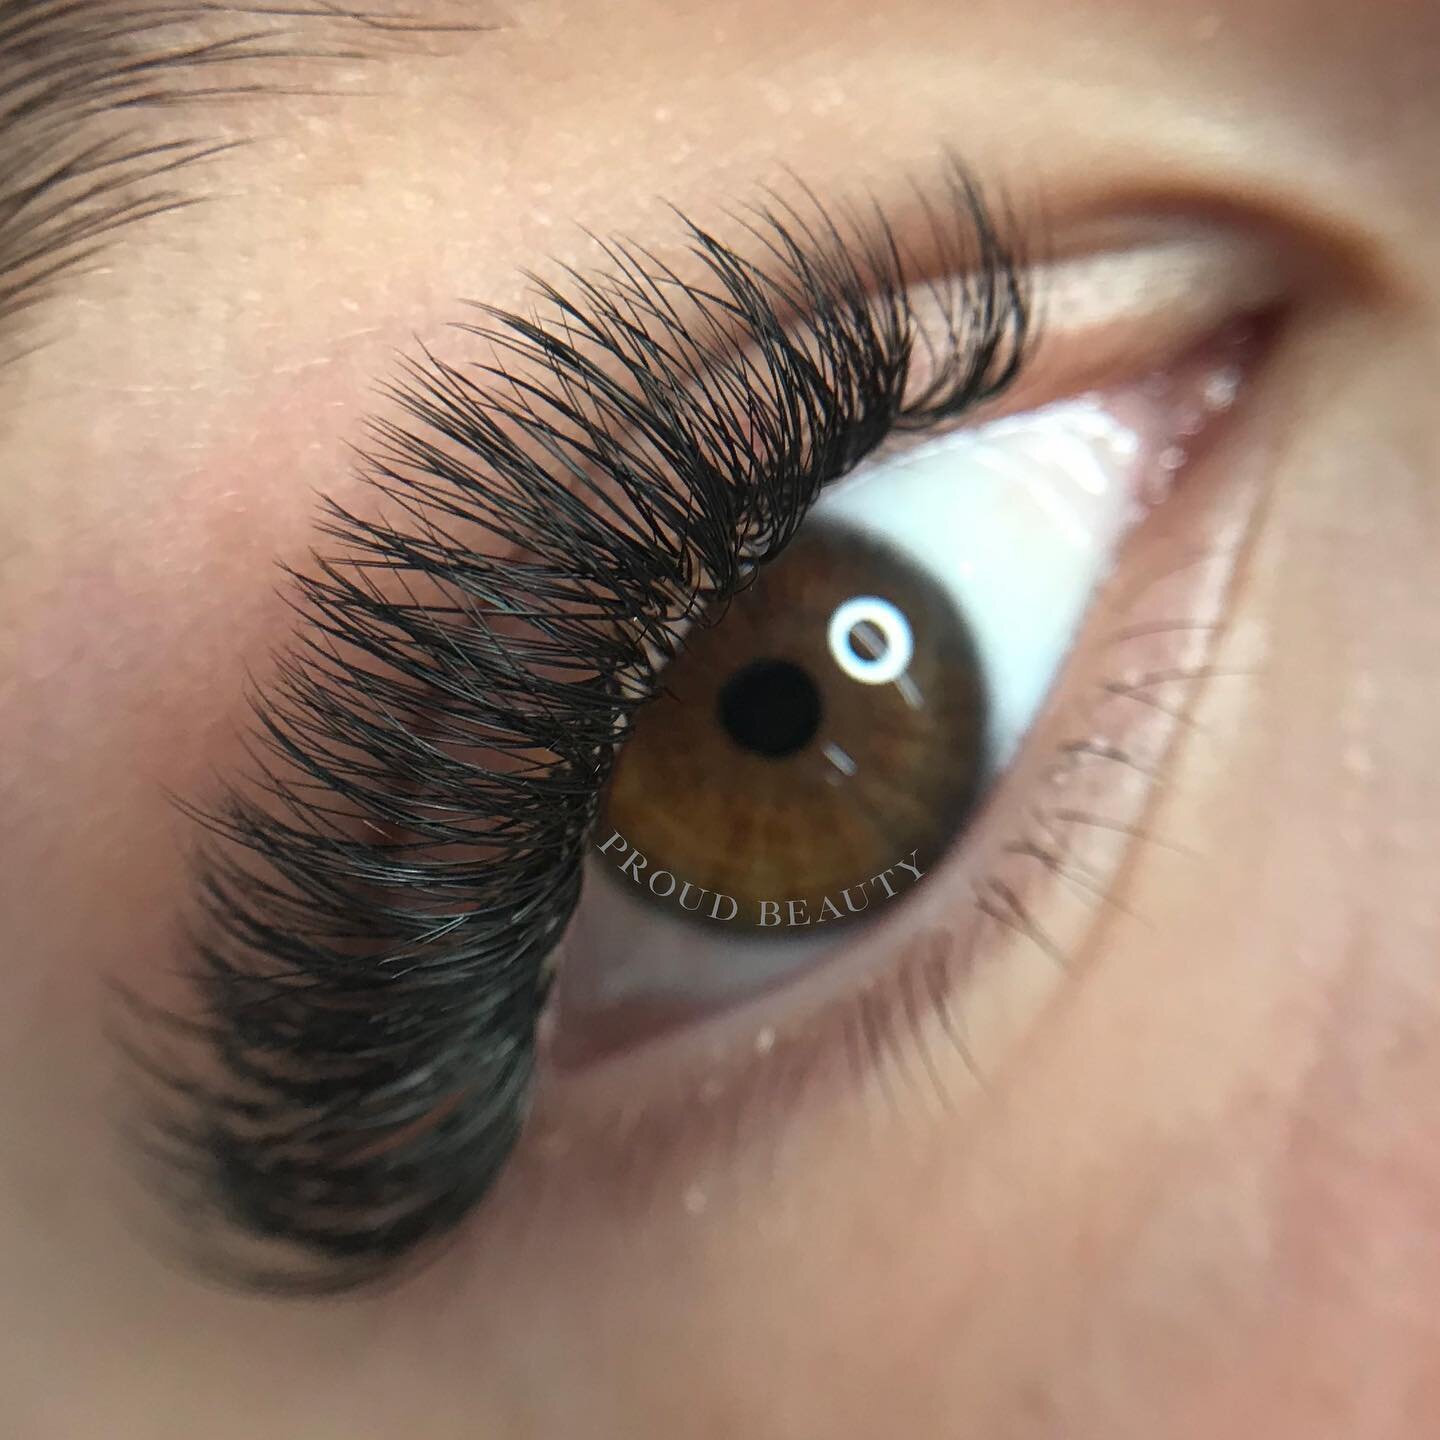 I really enjoyed doing this recent set of Russian Volume lashes! 
It&rsquo;s been all about Hybrids recently so it was fun to create something different 🌟 

Next photo will be of the beauty wearing her fresh lashes ..

&mdash;&mdash;&mdash;

#beauty